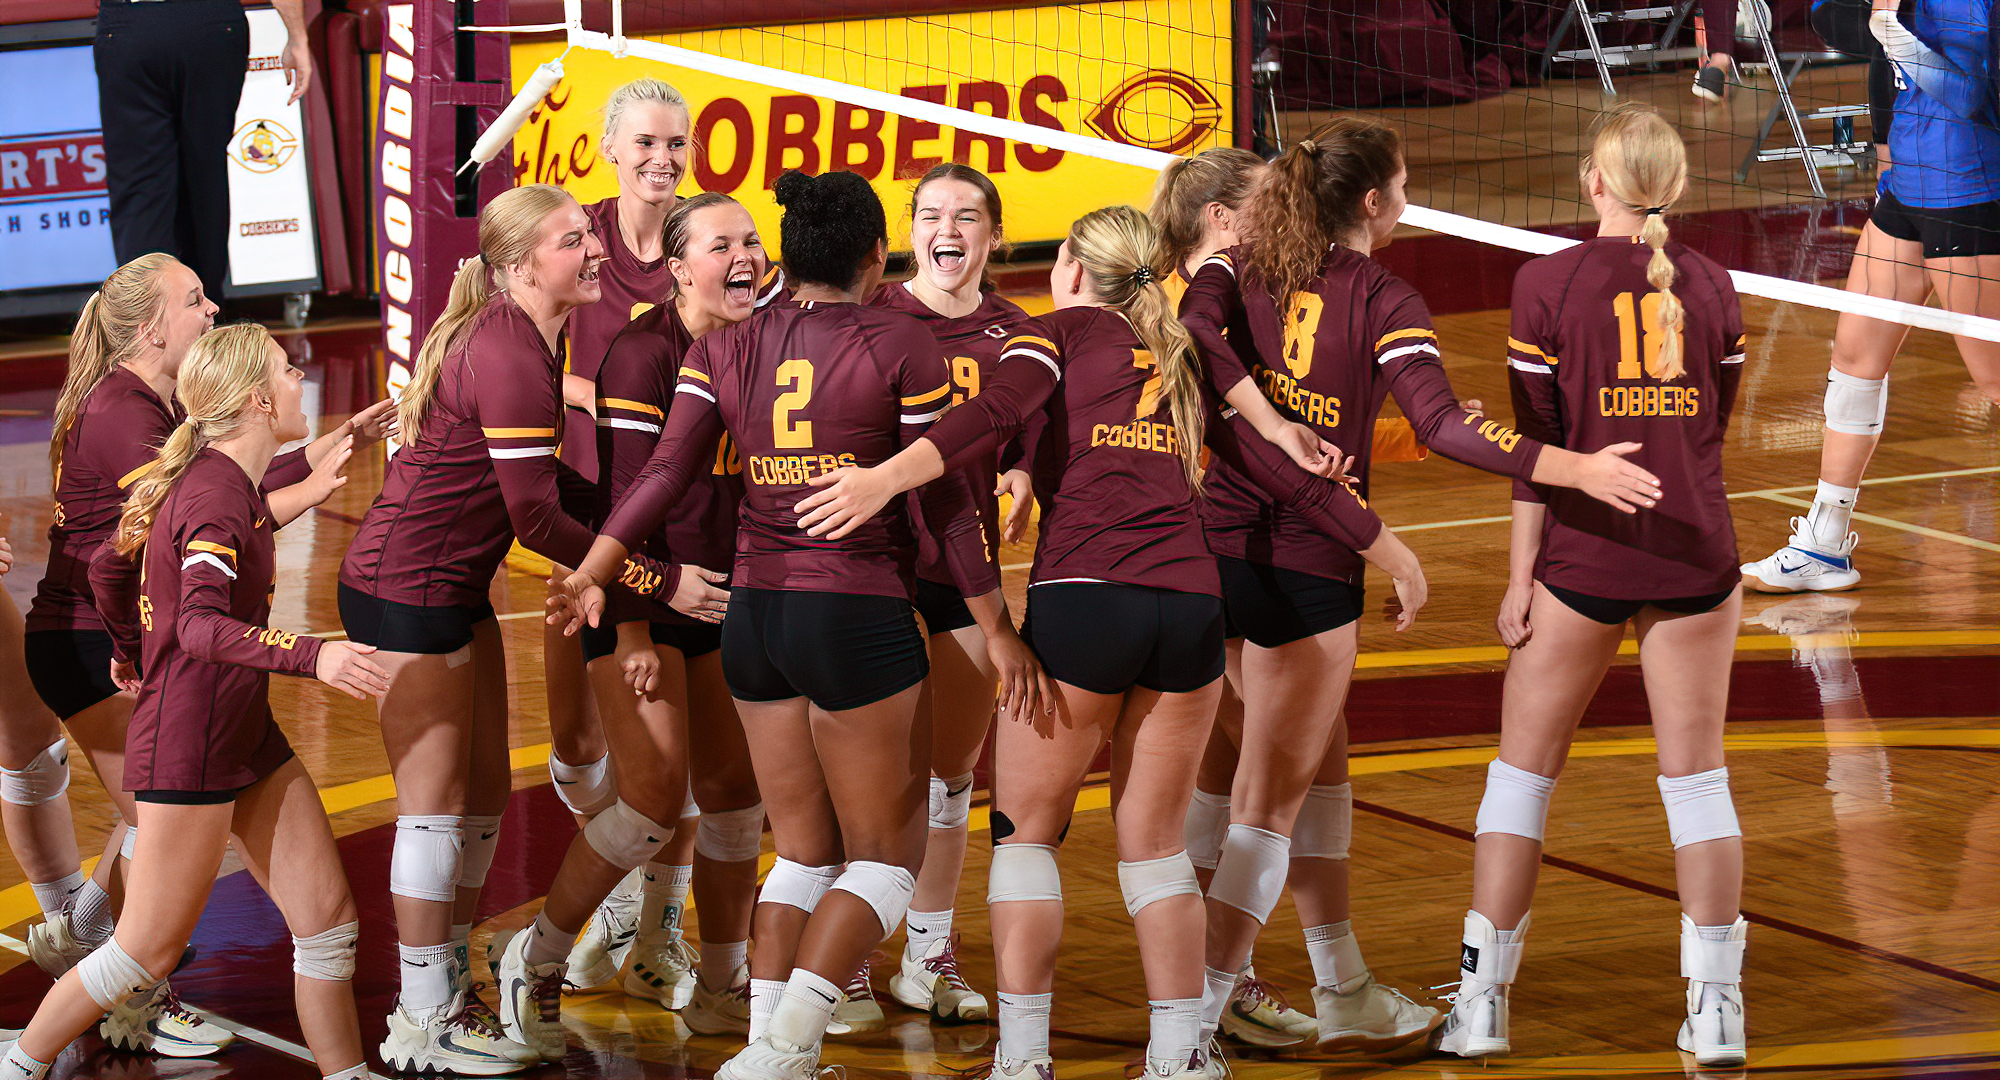 Concordia celebrates match point in their 3-1 win over Mayville State. Hannah Keil (#18) had the winner for the Cobbers.